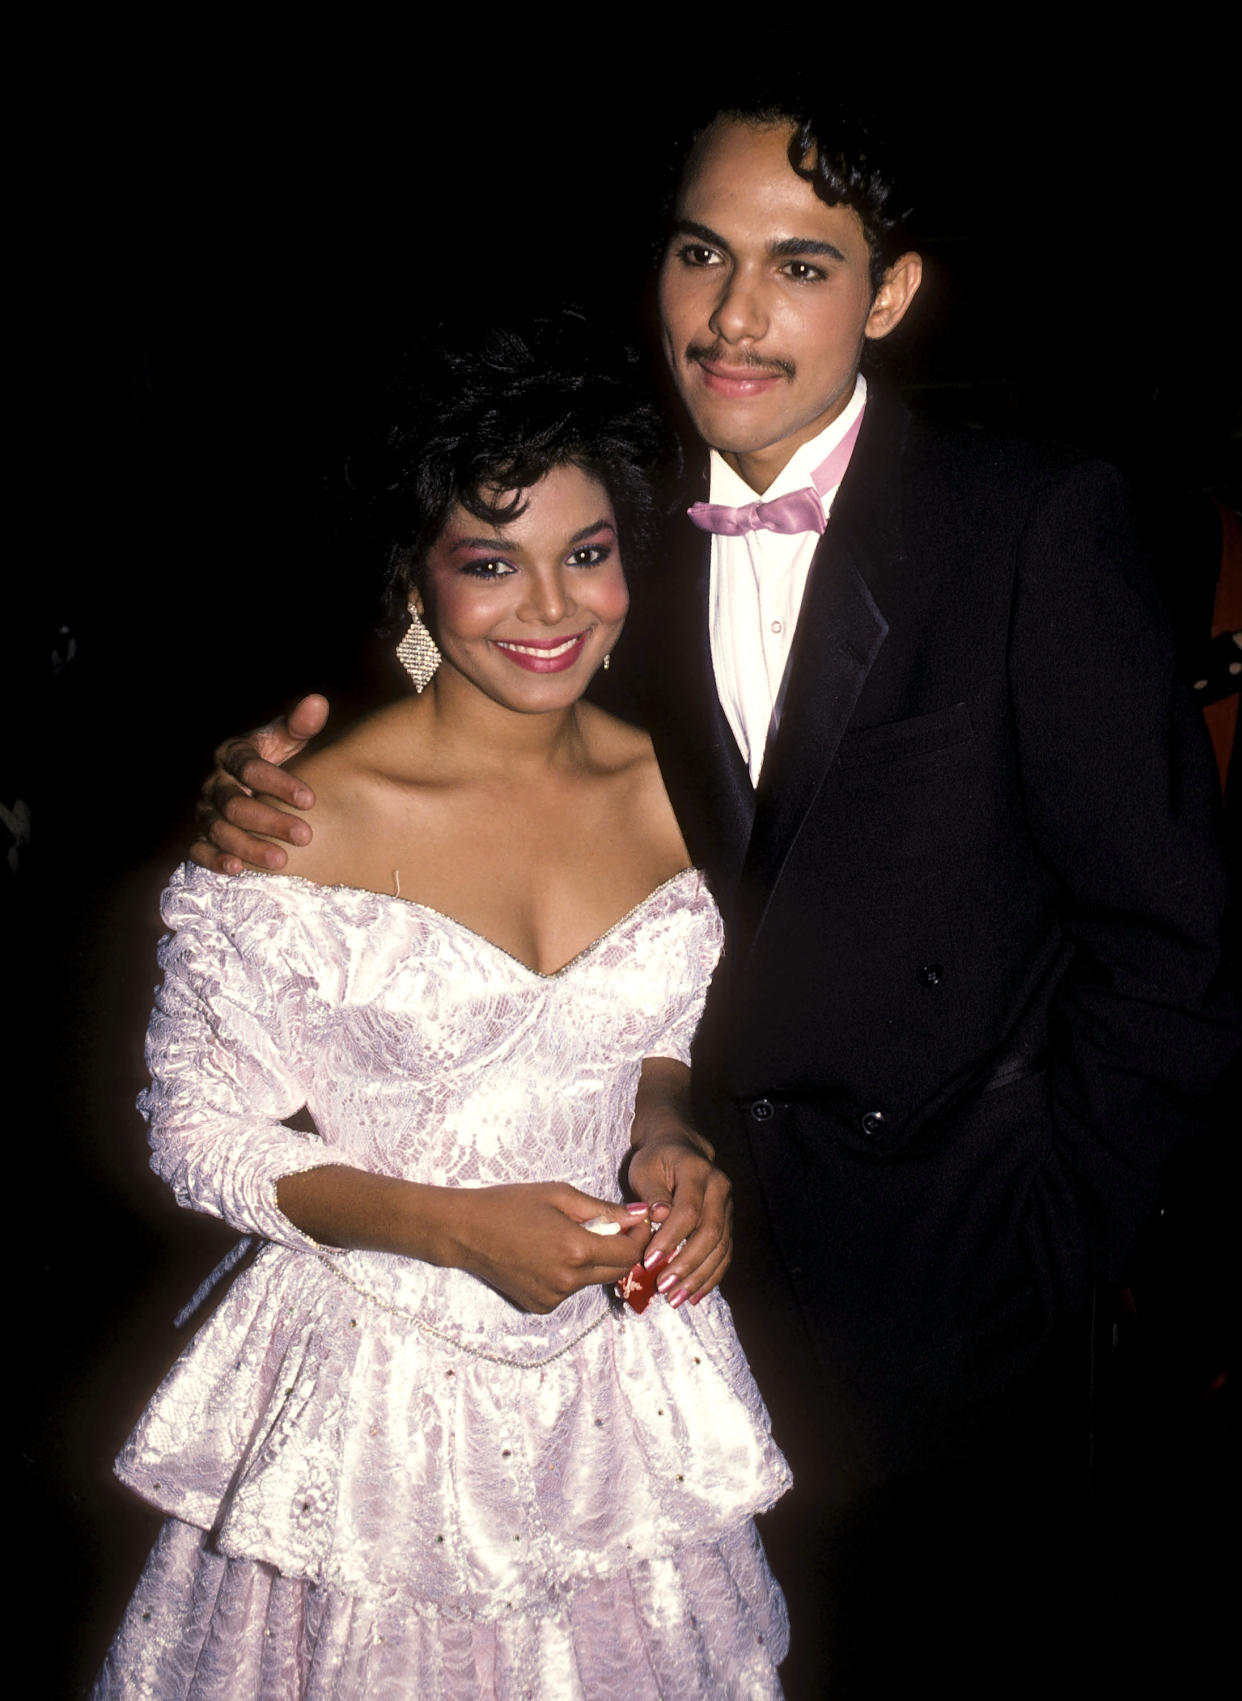 Janet Jackson and husband James DeBarge (Ron Galella / Getty Images)